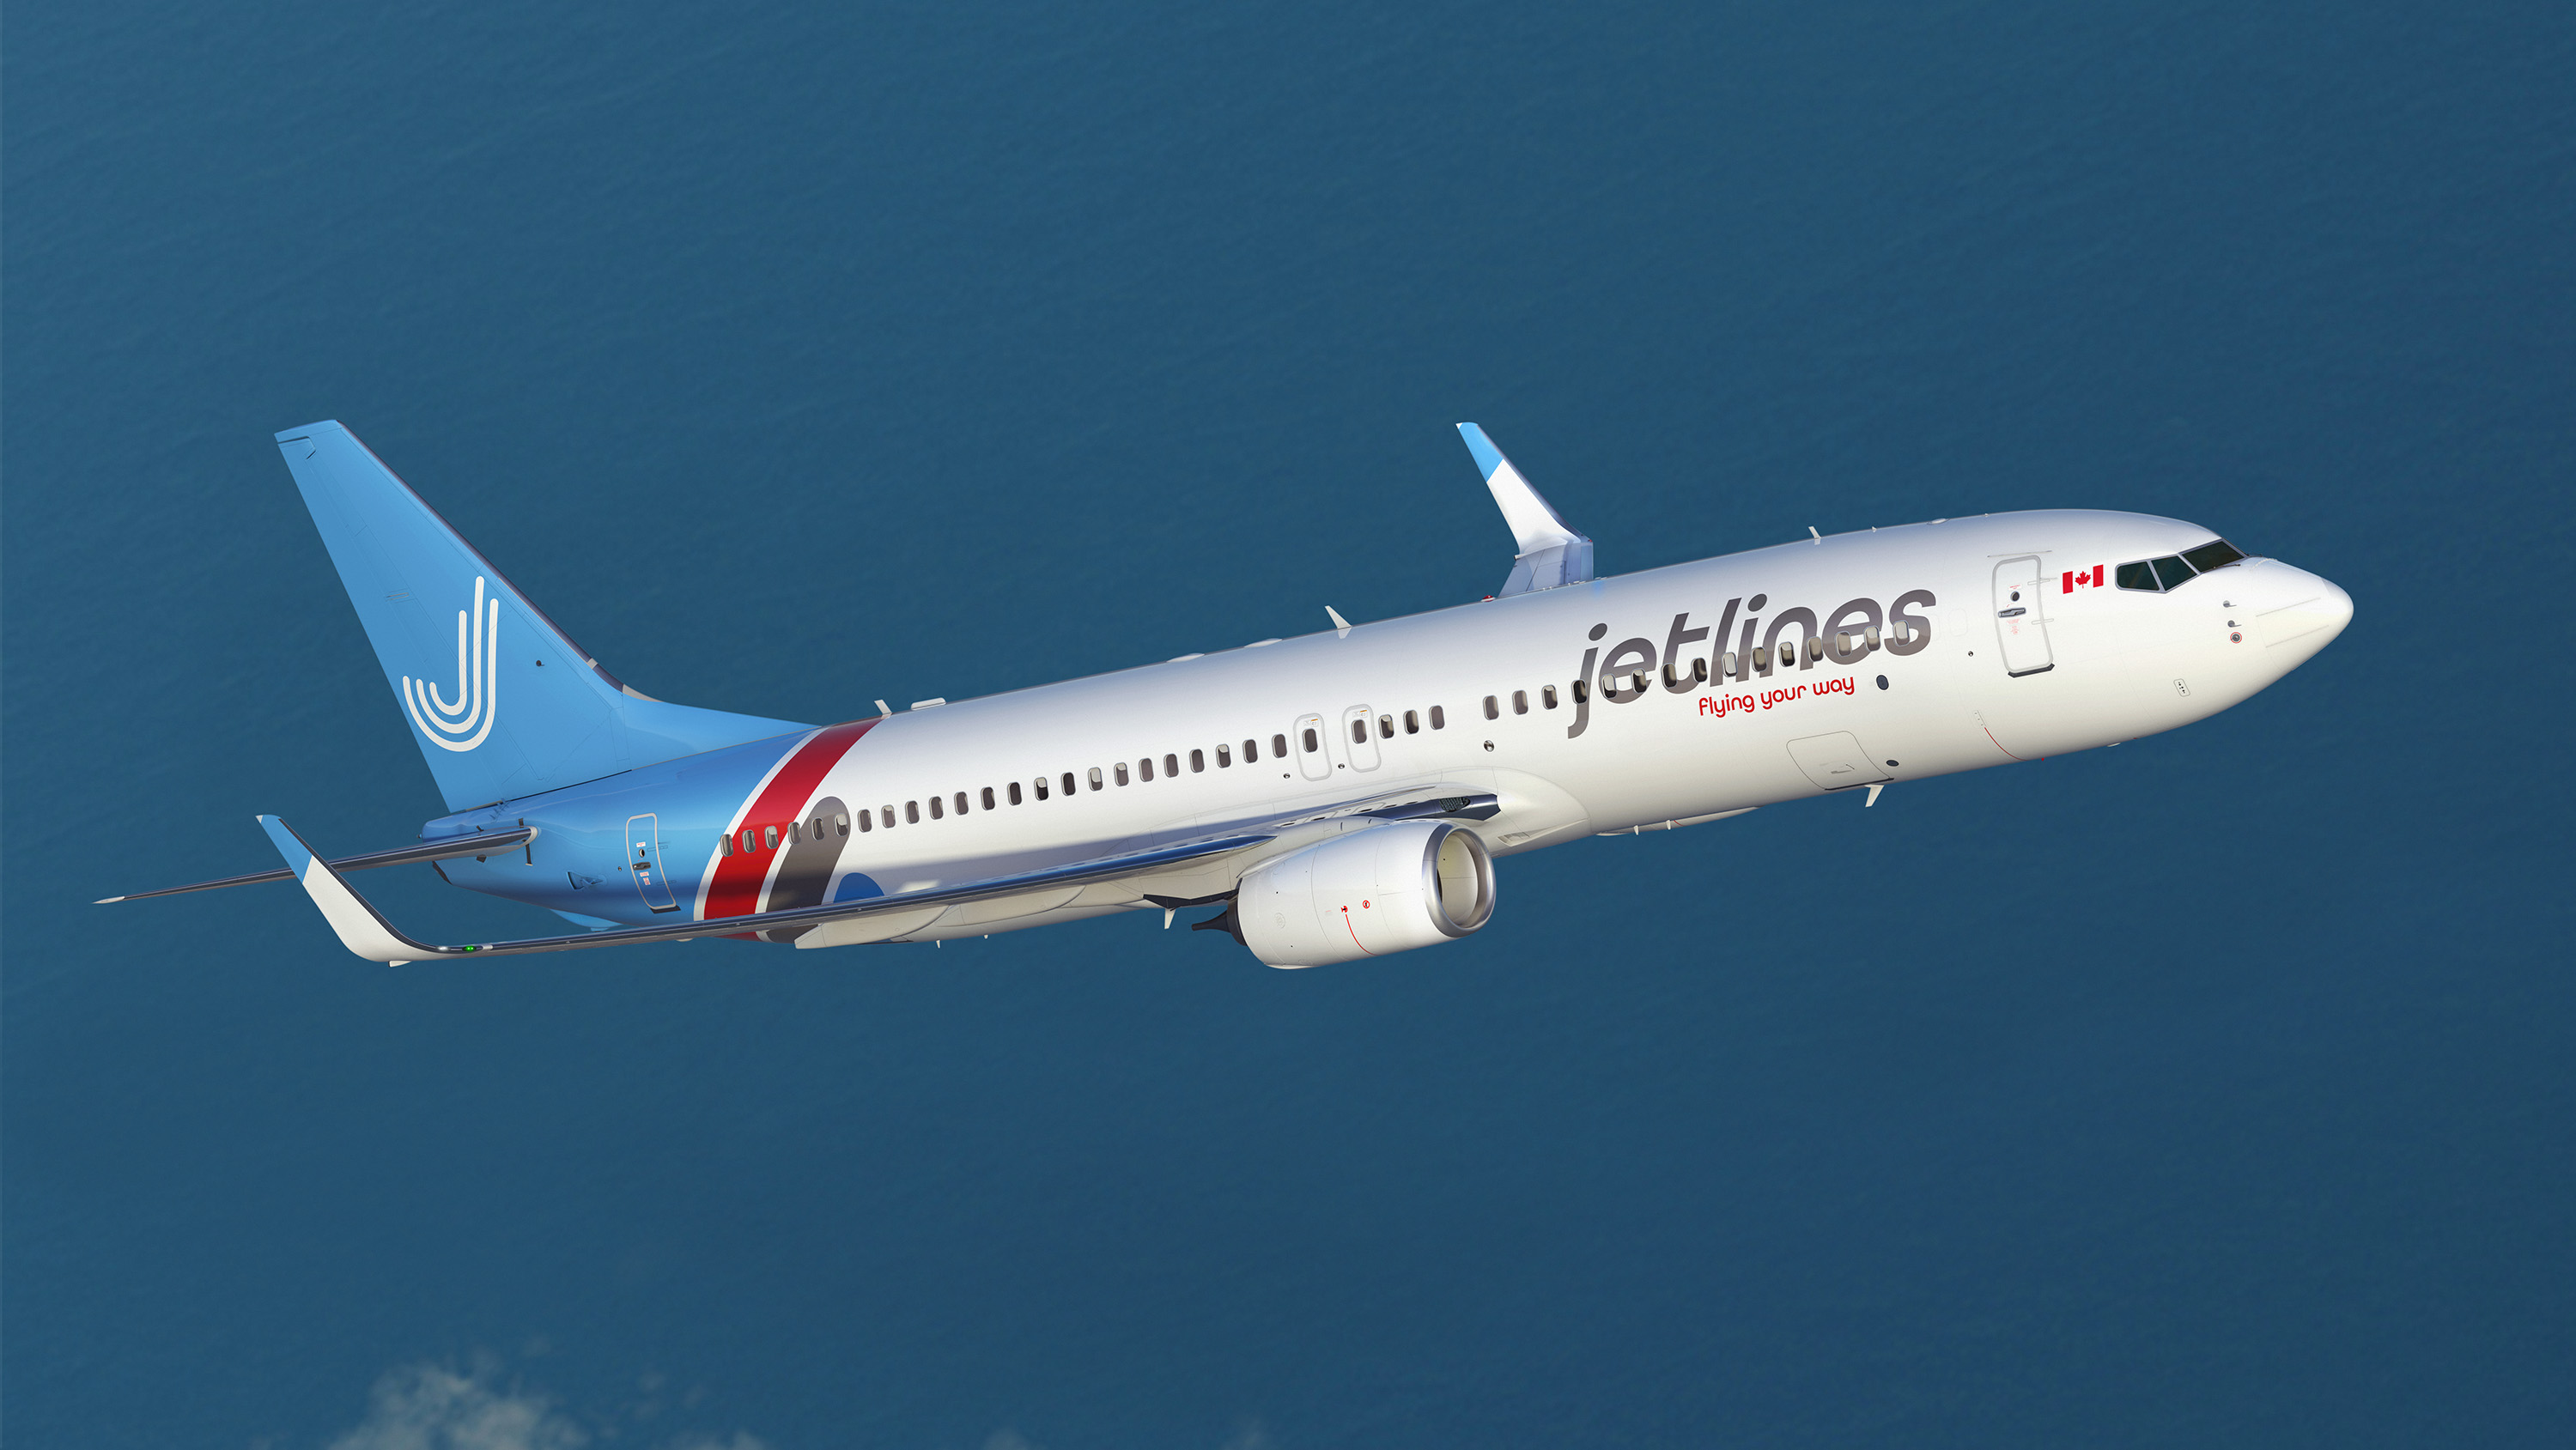 Airplane in Canada Jetlines livery, in filght